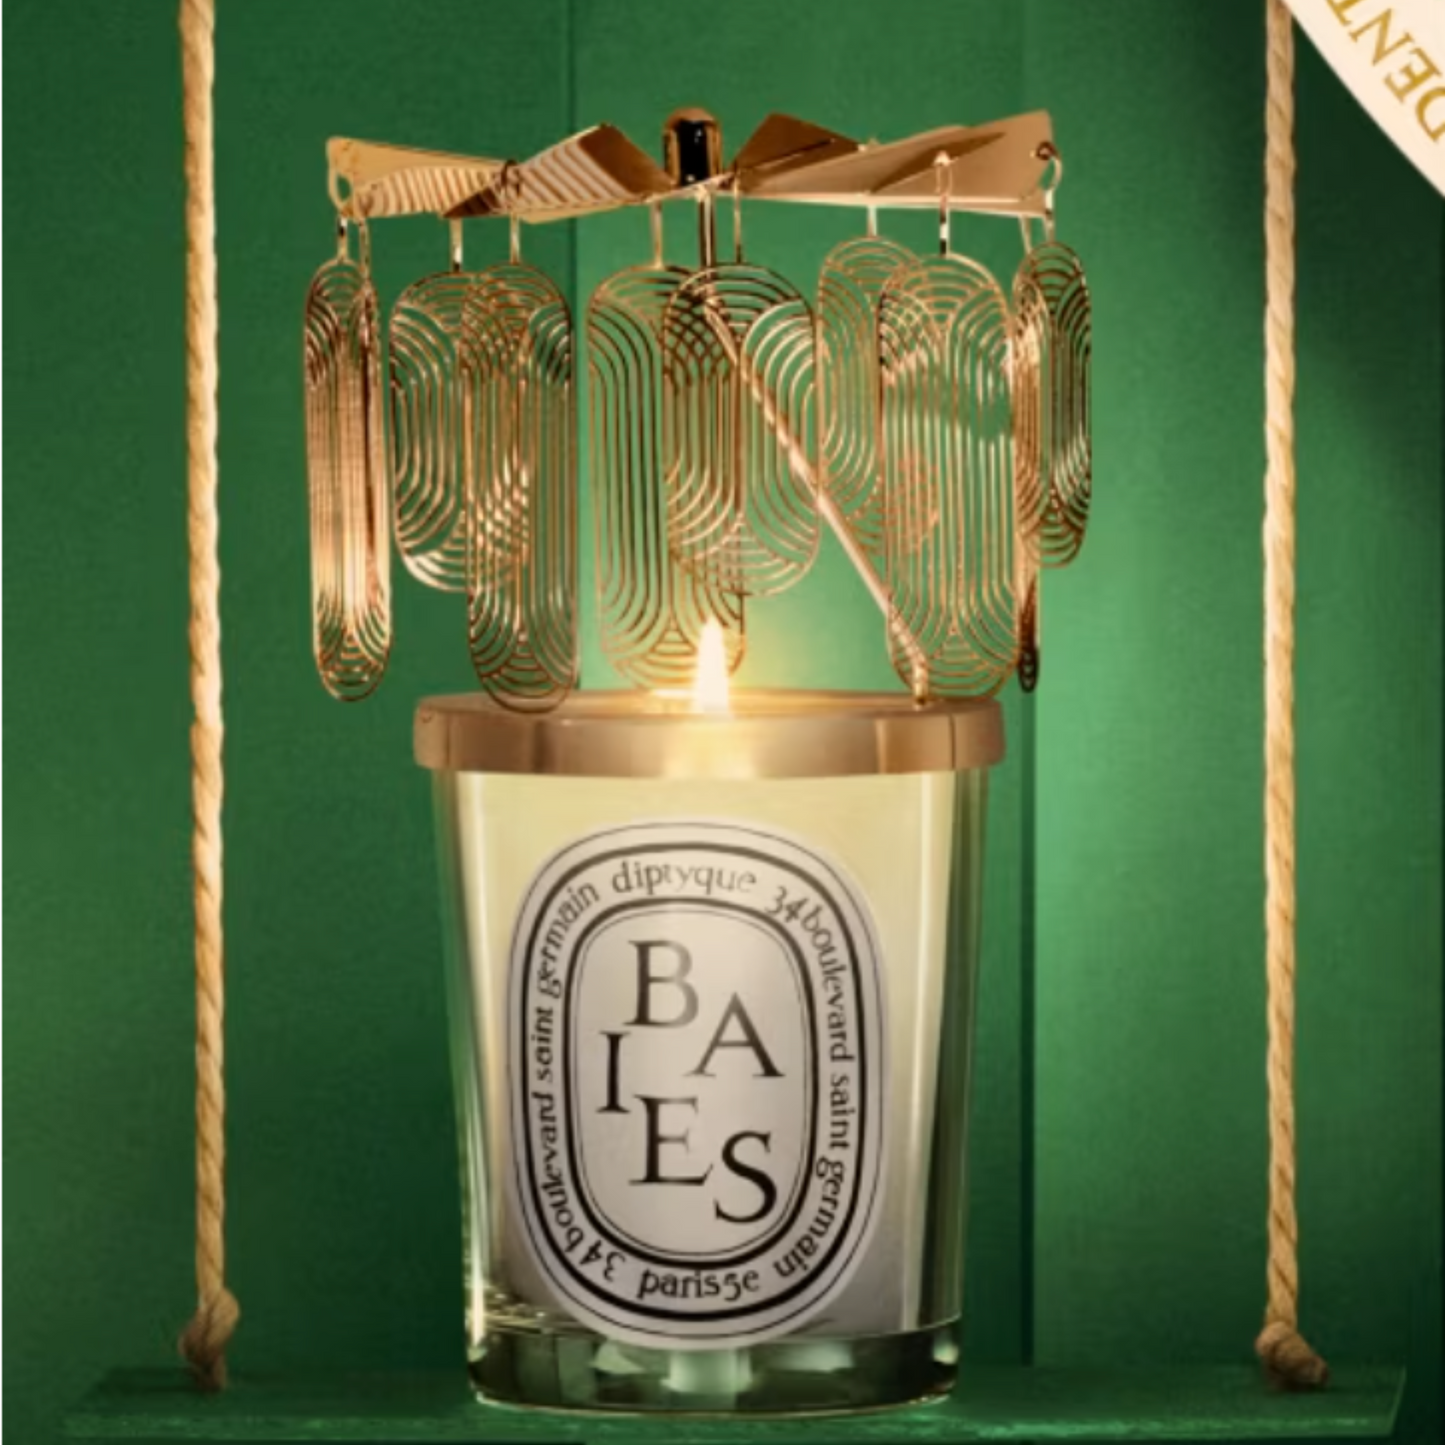 Diptyque - Holiday Carousel - Baies - Limited Edition